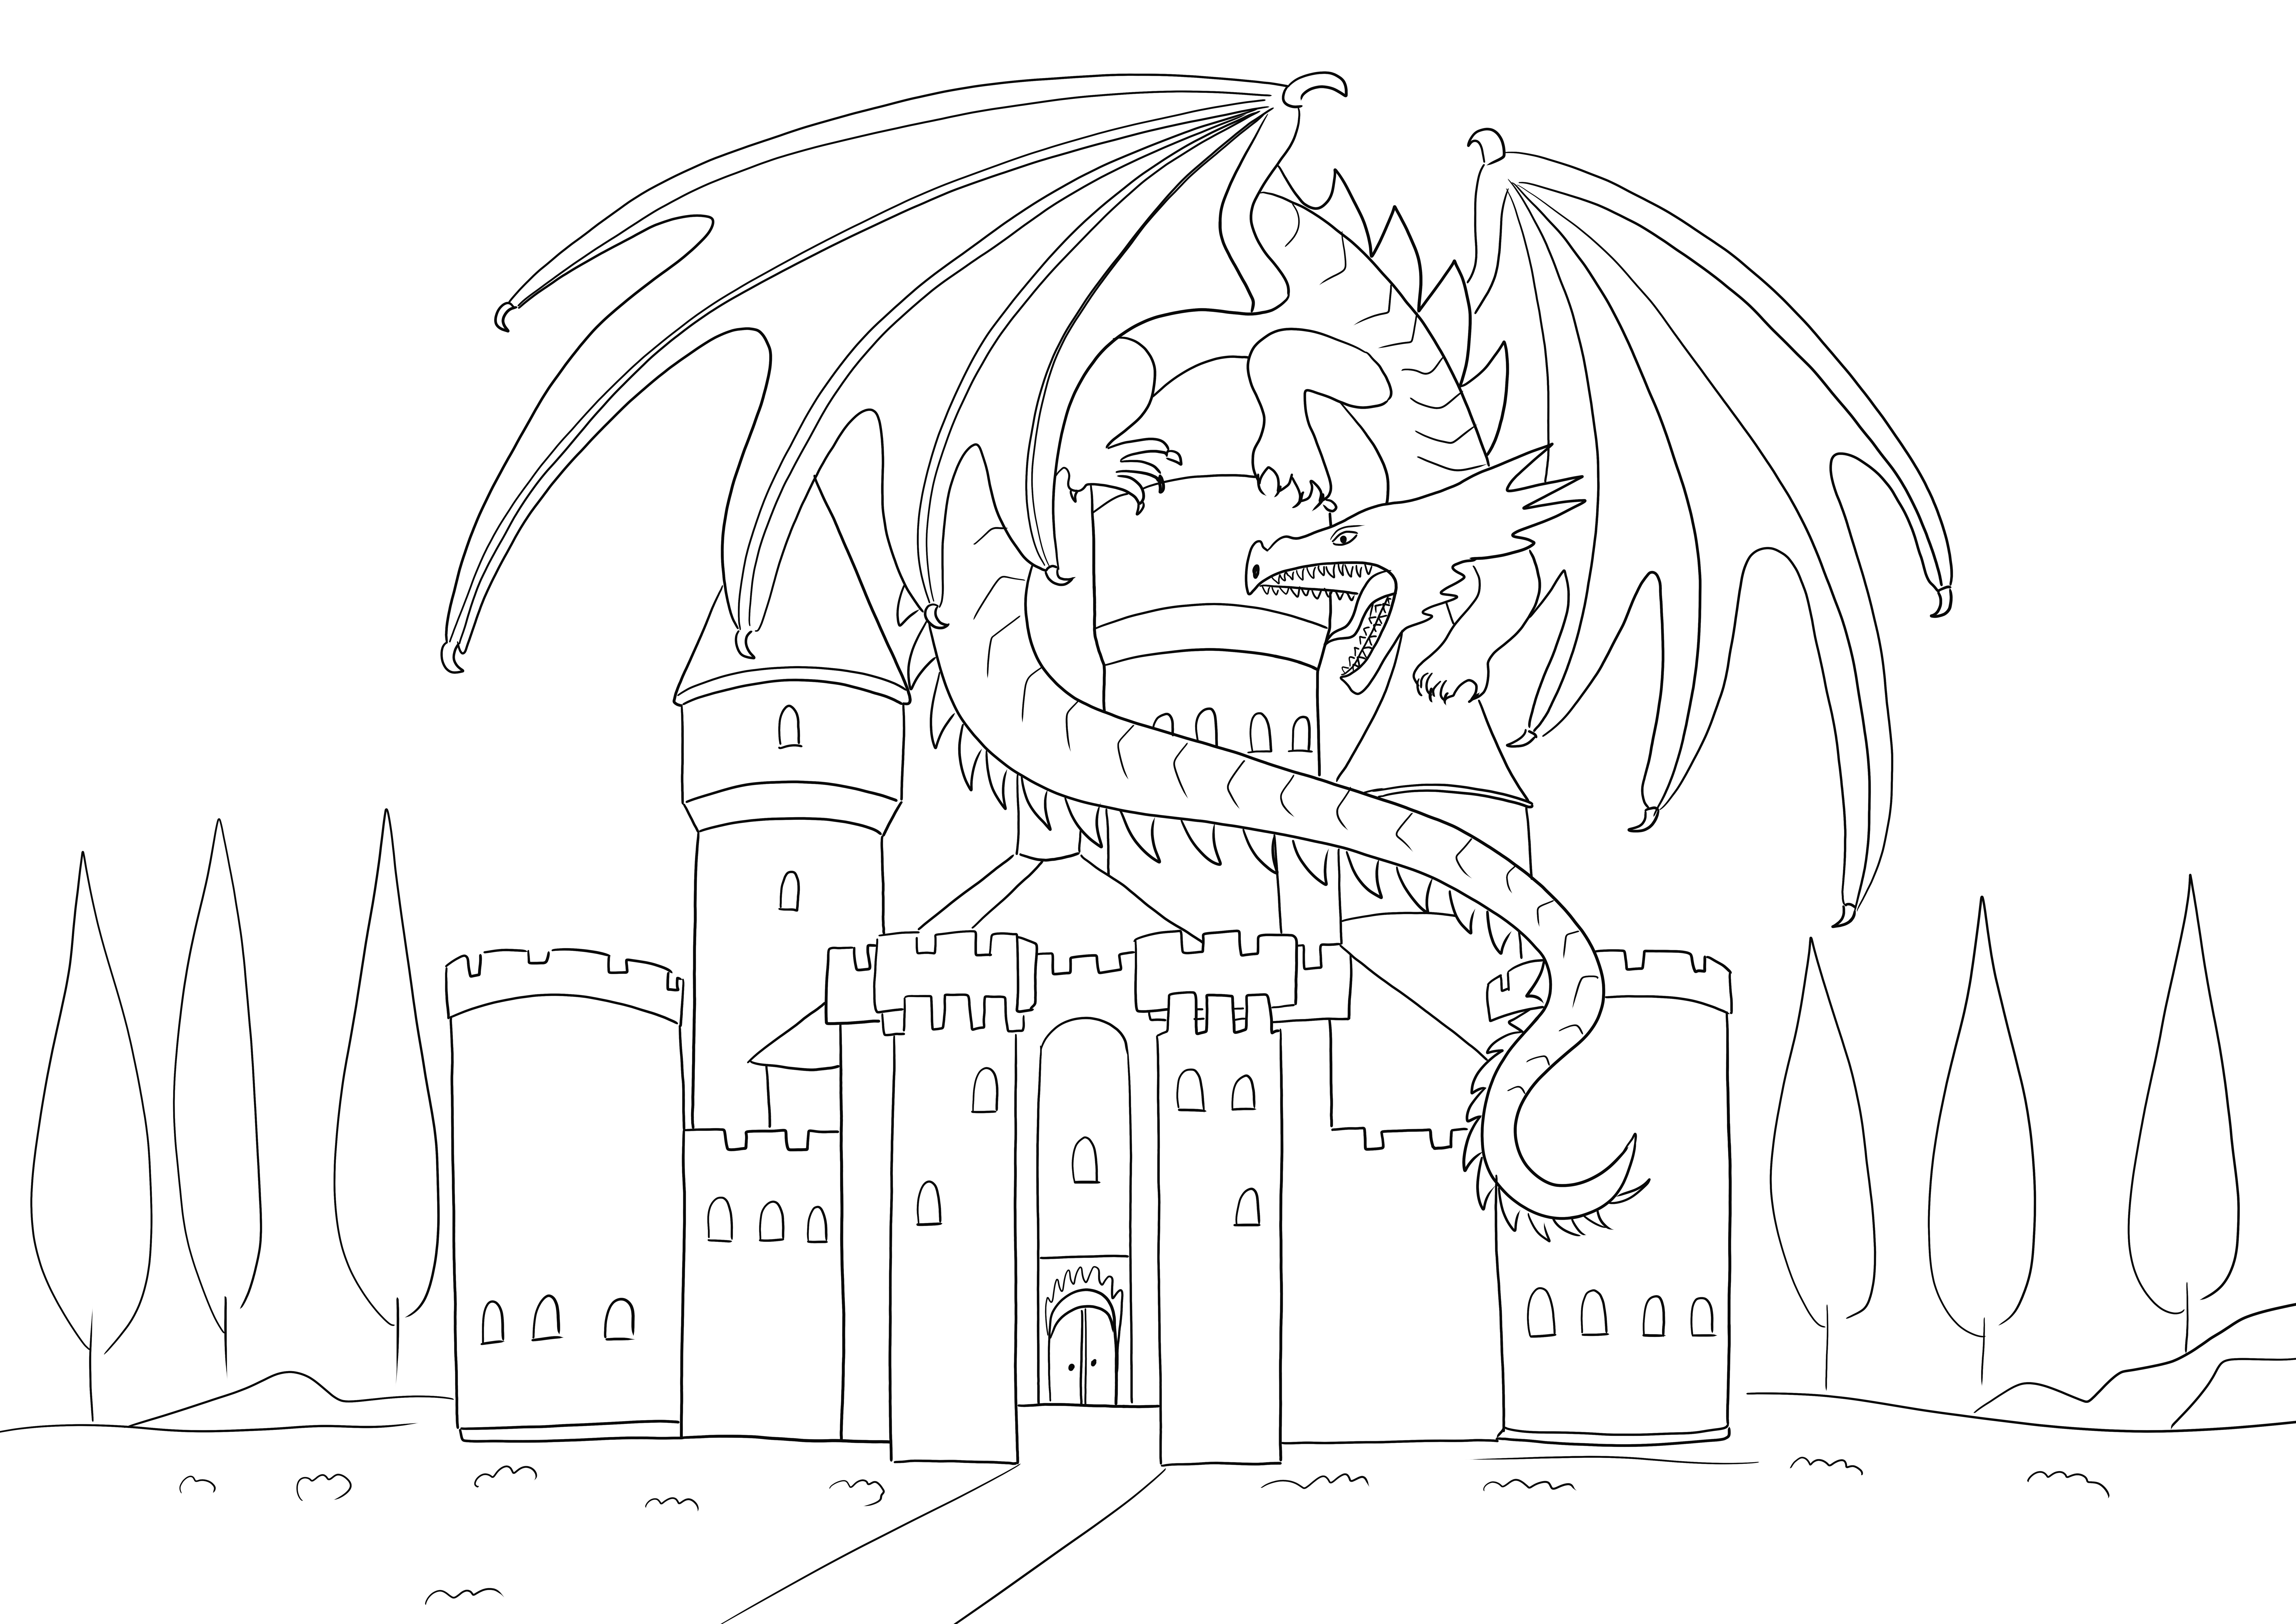 Dragon and Castle is ready for printing and coloring for kids